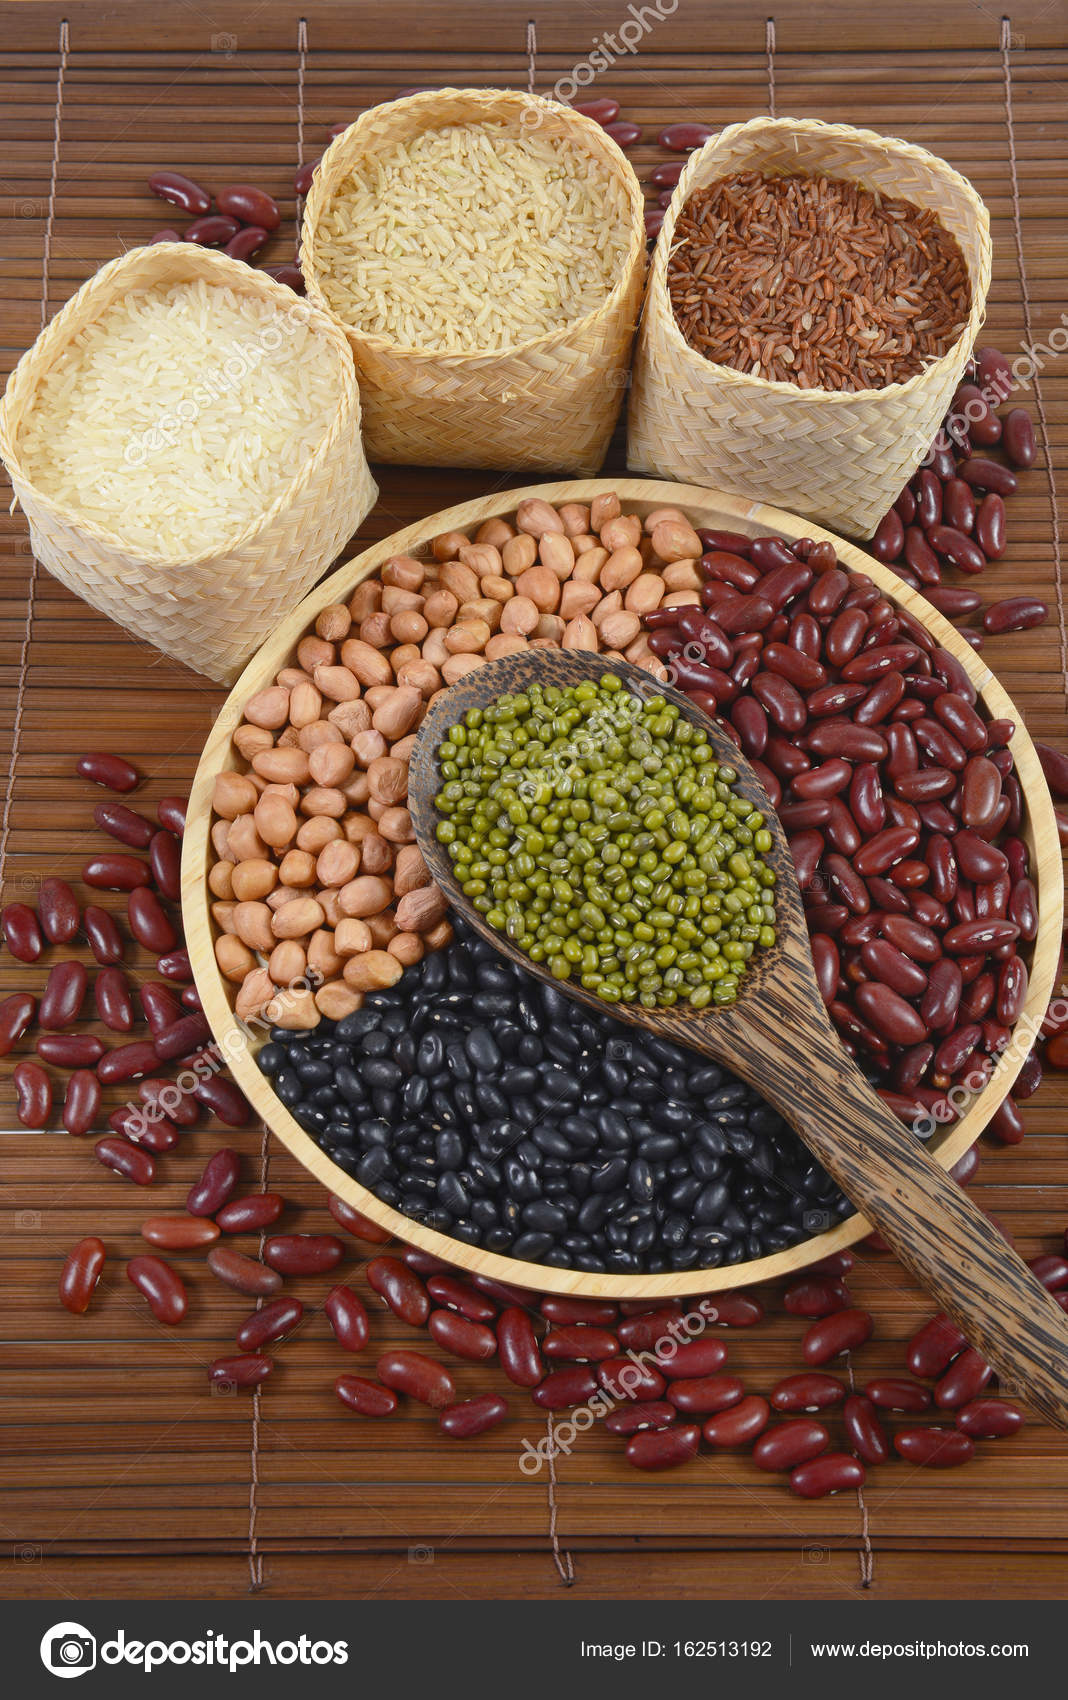 Cereal Grains And Seeds Beans Black Bean Red Bean Peanut Mung Bean Thai Jasmine Rice Brown Rice And White Rice Useful For Health In Wood Spoons On Wood Background Stock Photo C